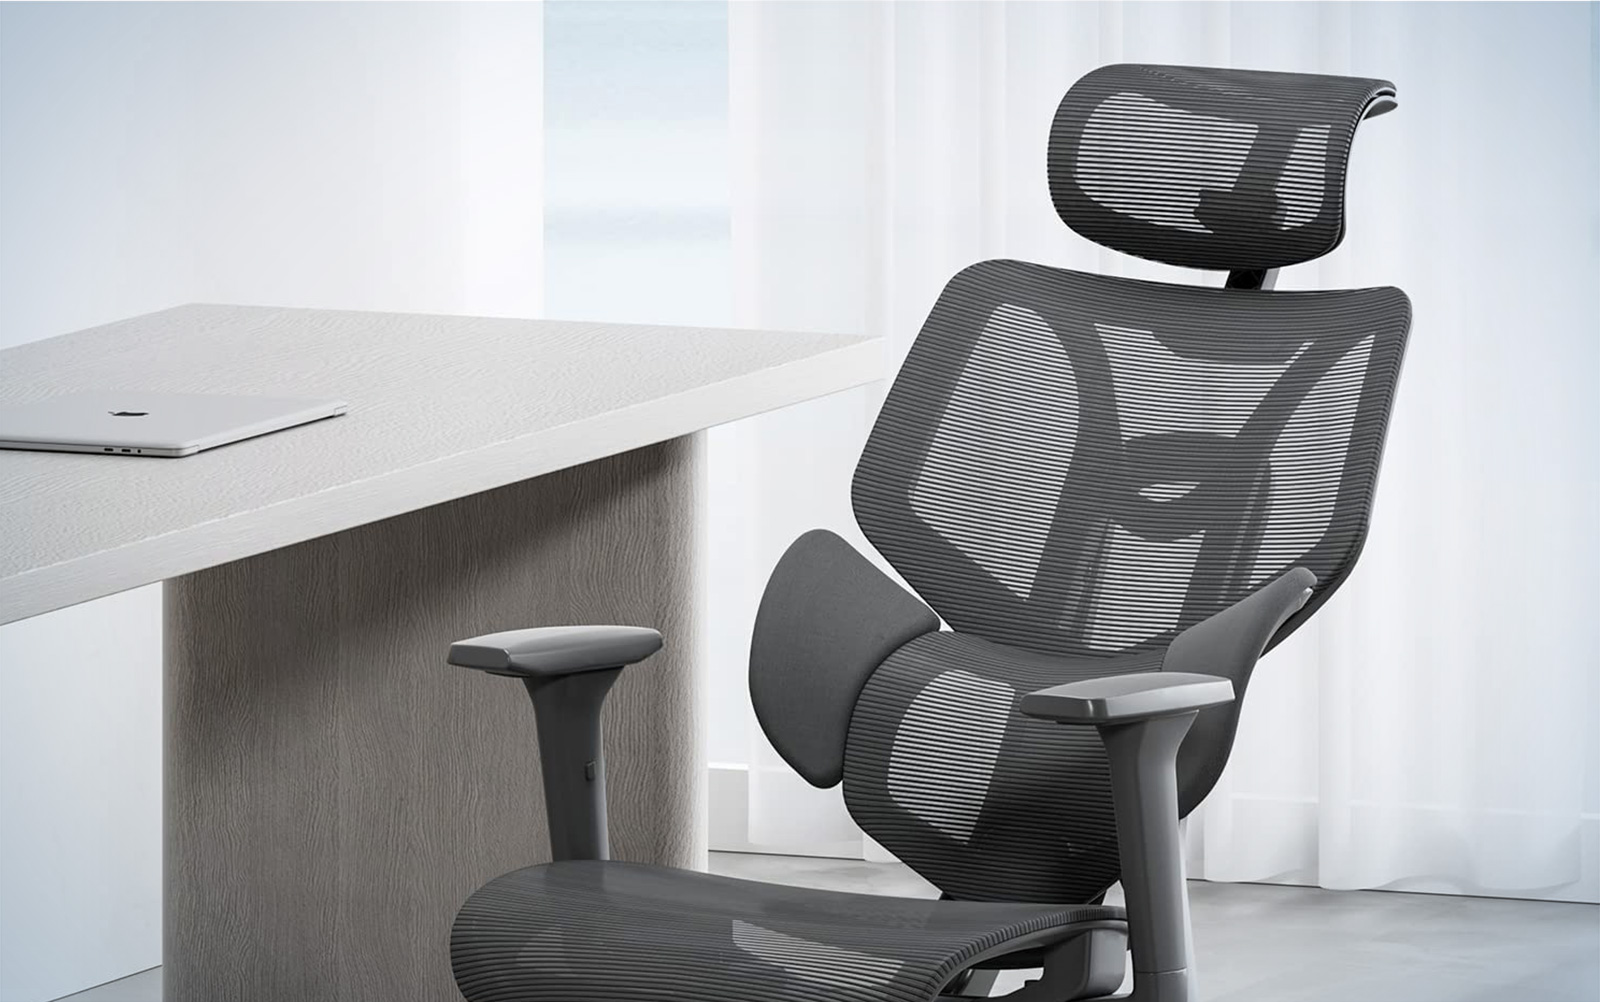 13 Best Lumbar Support Office Chairs for a Comfortable Workspace